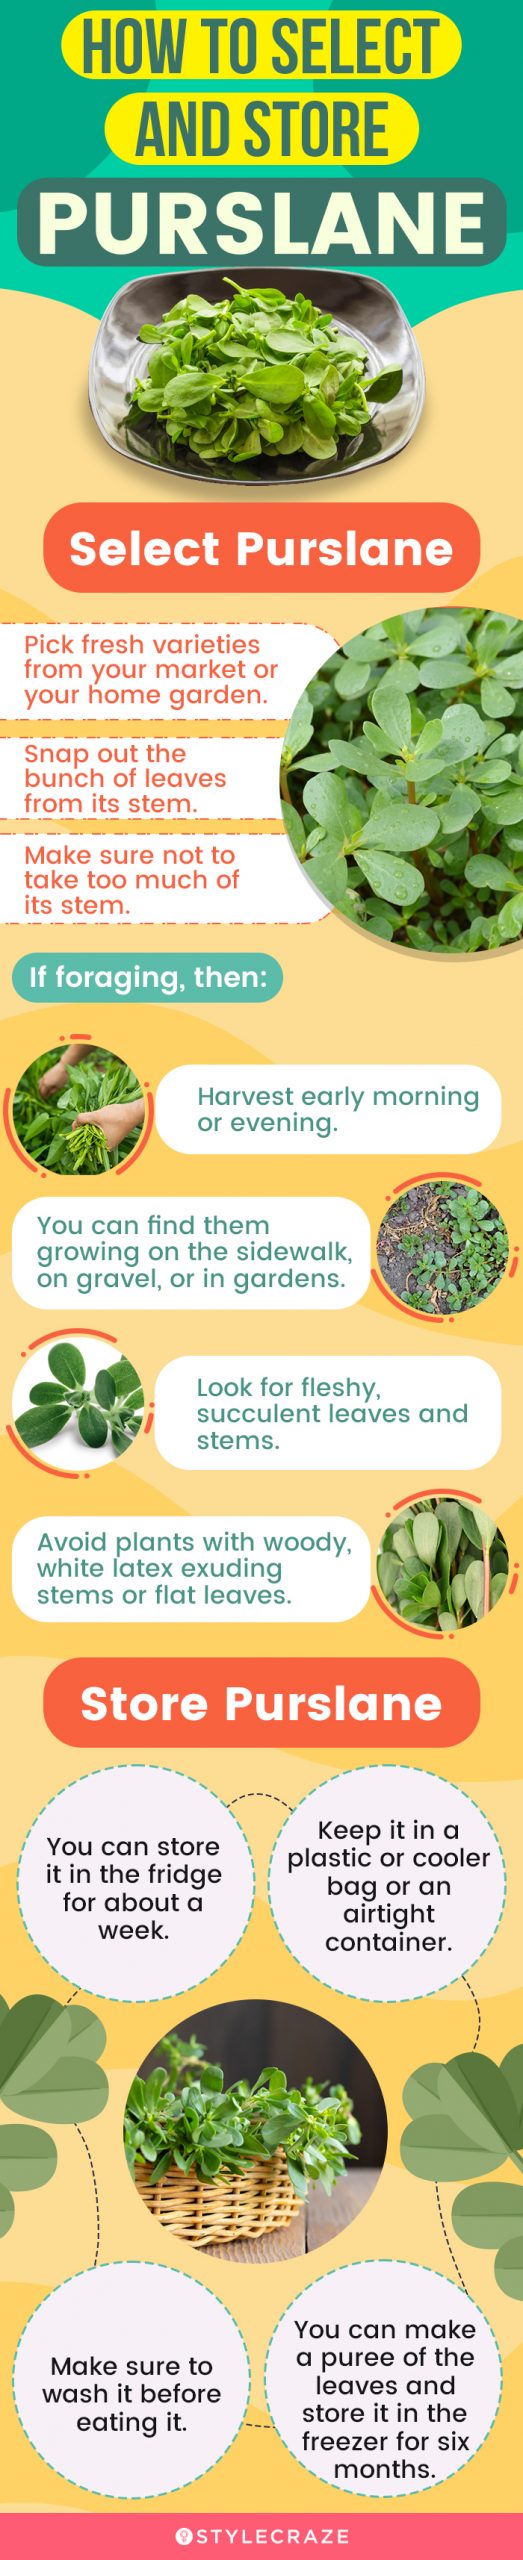 how to select and store purslane (infographic)